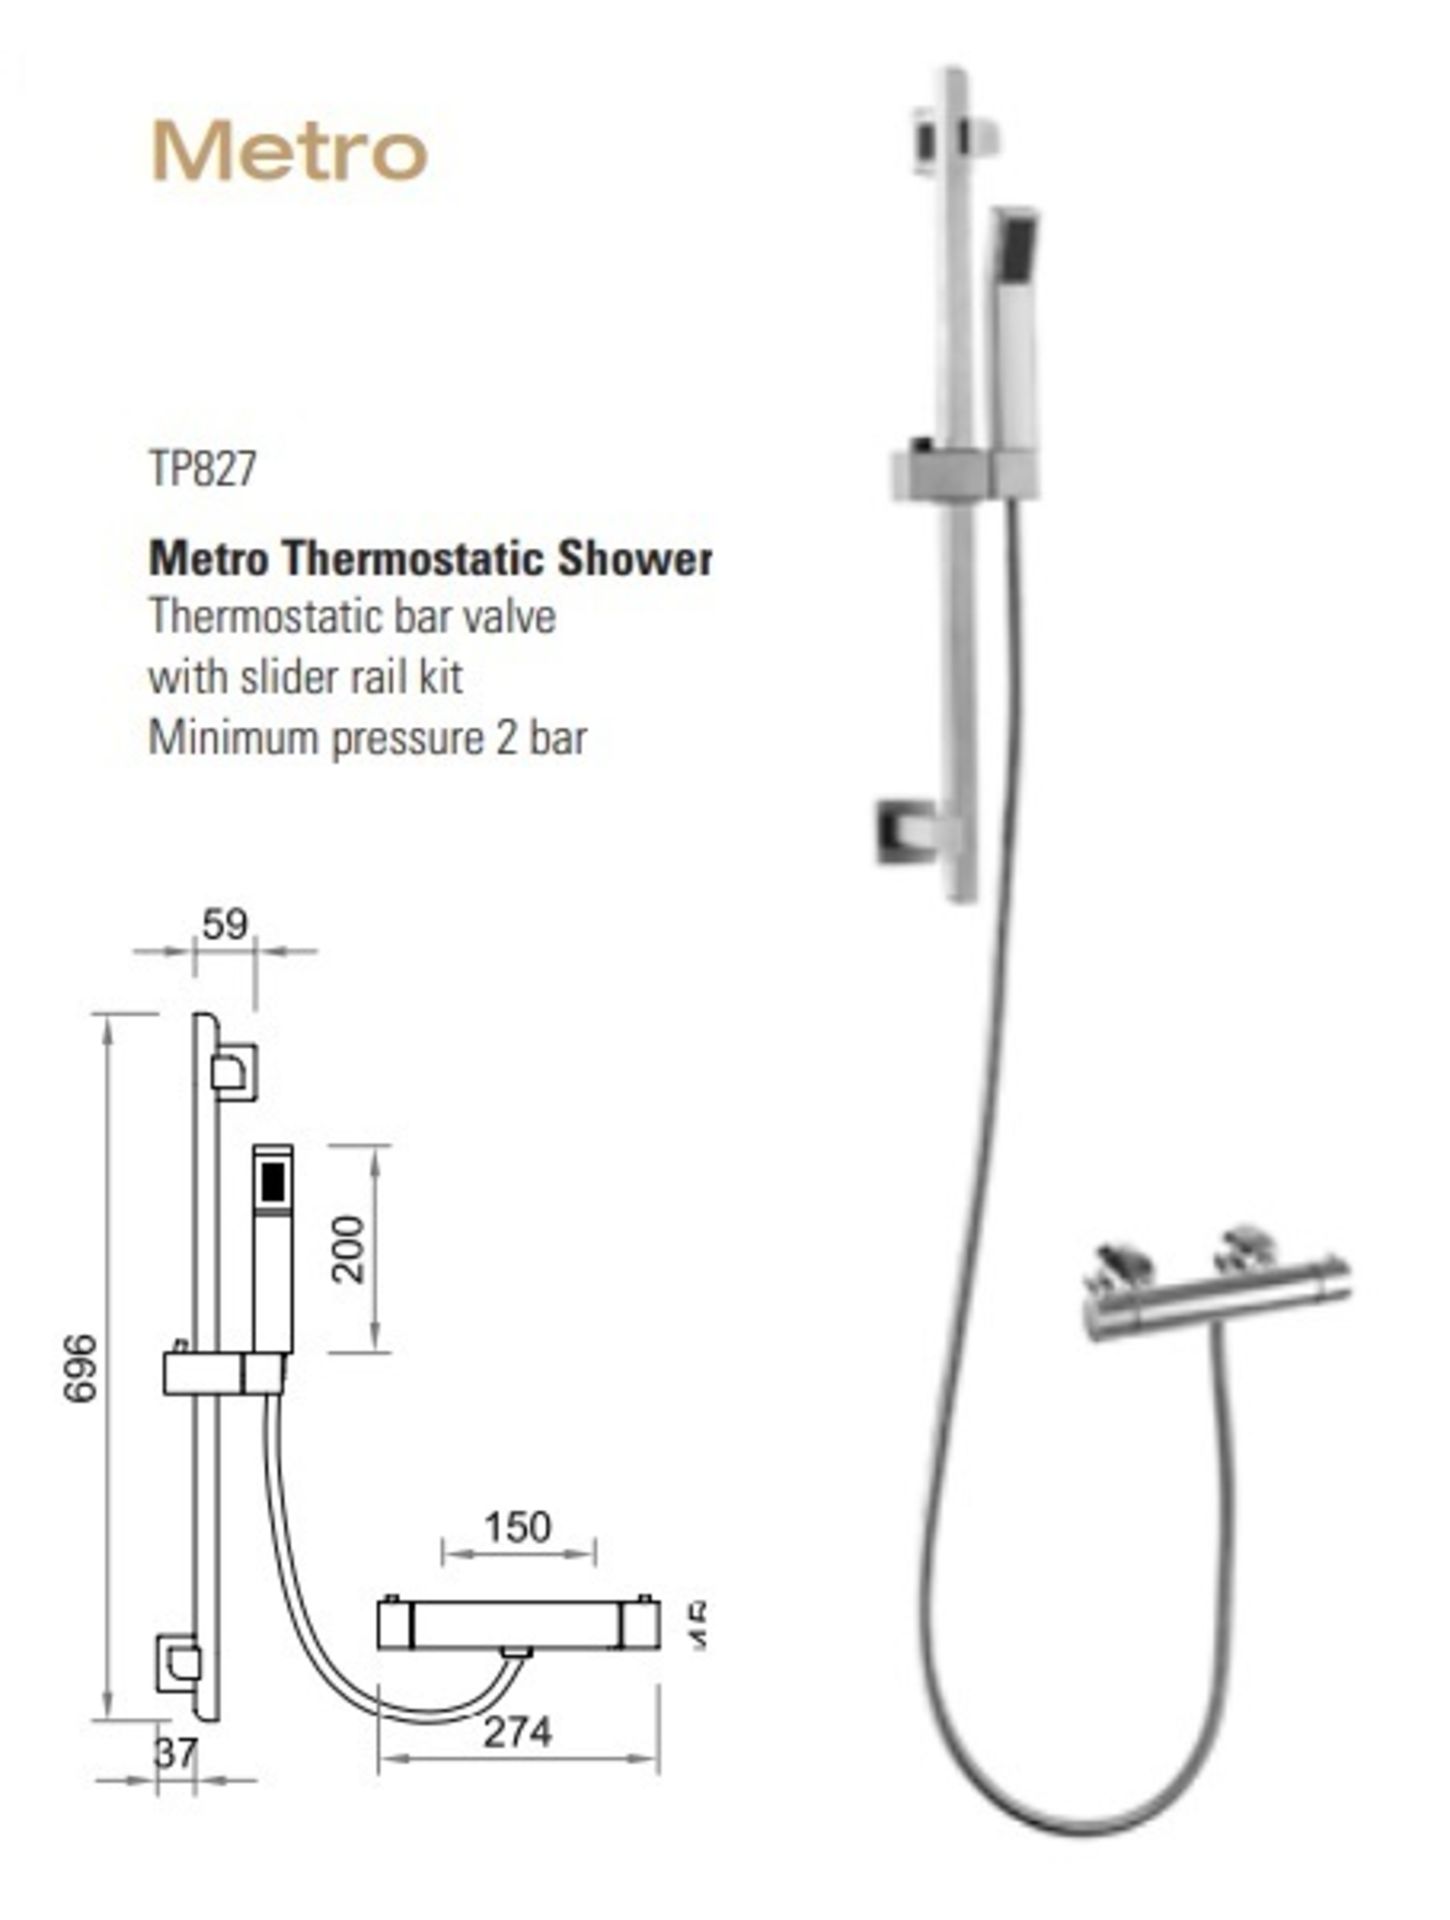 1 x Stonearth 'Metro' Stainless Thermostatic Shower Kit - Brand New & Boxed - RRP £495 - Ref: - Image 2 of 14